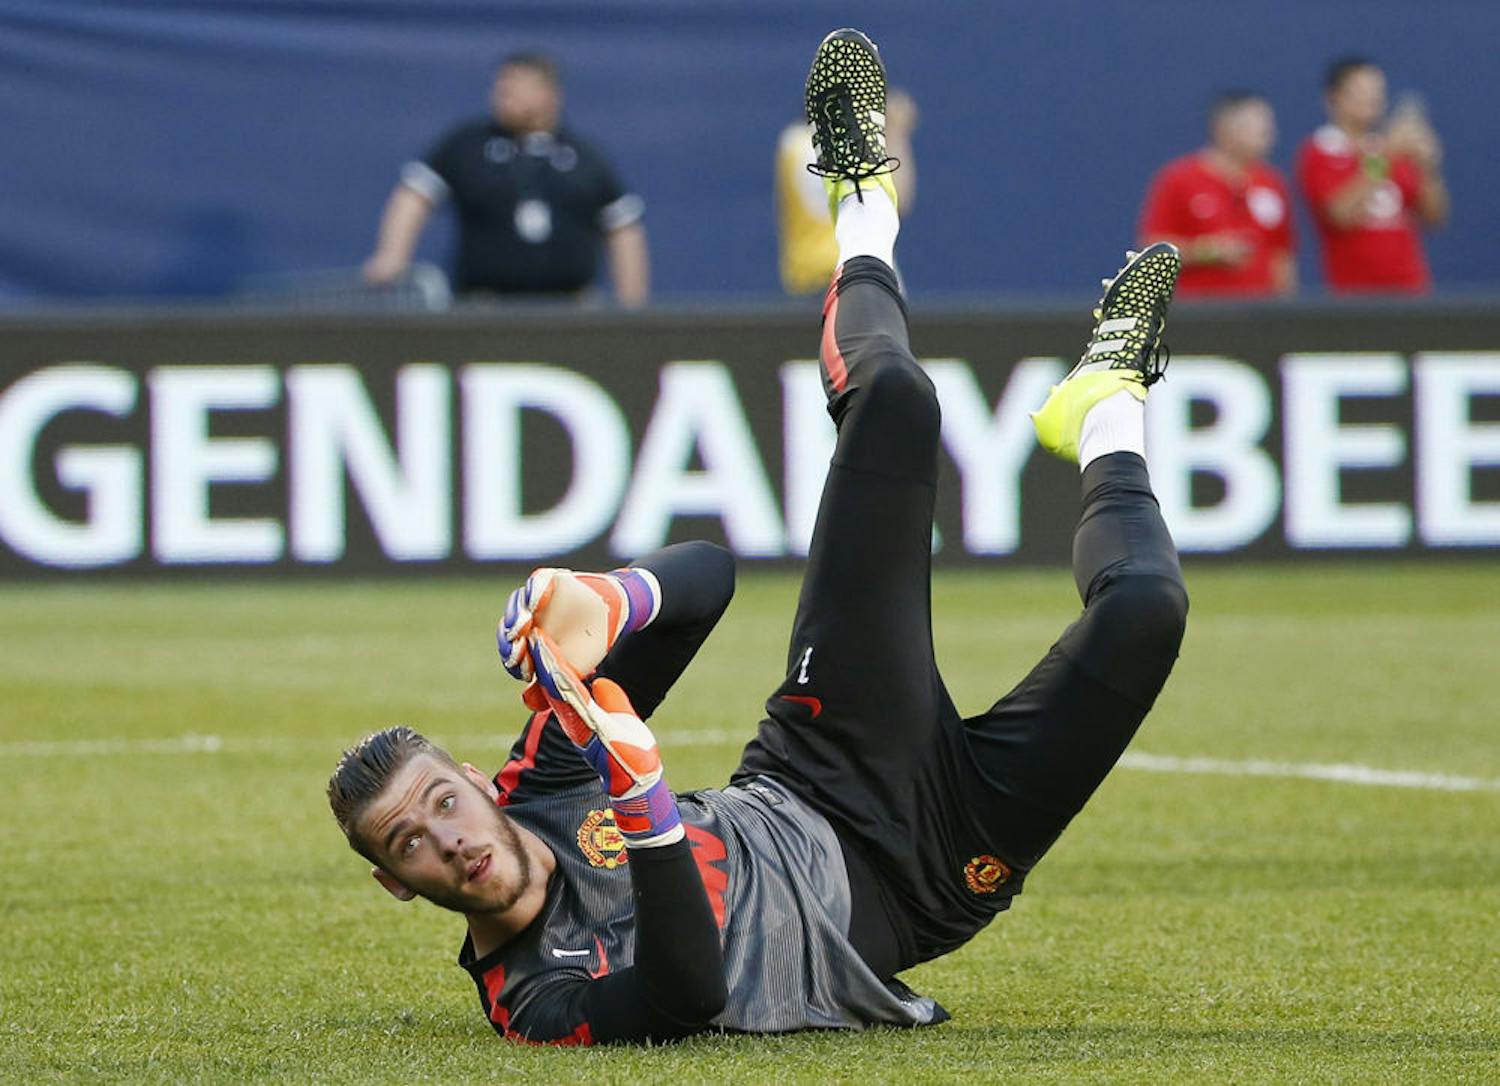 Manchester United's goalkeeper David de Gea warms up before an International Champions Cup soccer match against Paris Saint-Germain in Chicago on July 29.